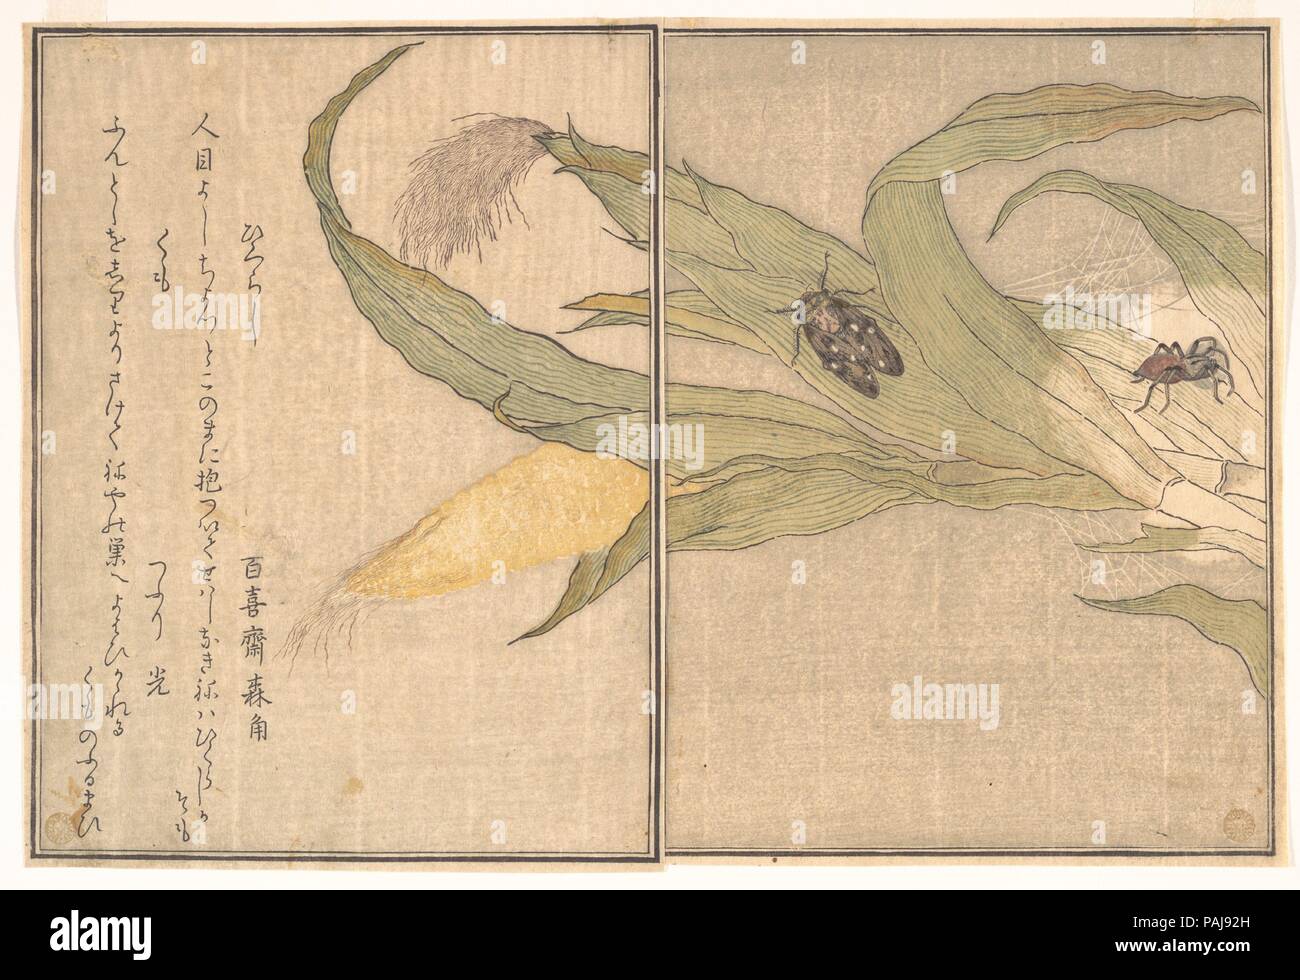 Evening Cicada, Higurashi; Spider, Kumo, from the Picture Book of Crawling Creatures (Ehon mushi erami). Artist: Kitagawa Utamaro (Japanese, ca. 1754-1806). Culture: Japan. Dimensions: 10 1/2 x 7 7/32 in. (26.7 x 18.4 cm). Date: 1788.  Ehon mushi erami (Picture Book of Crawling Creatures) is illustrated with fifteen designs of insects and other garden creatures by Utamaro. Published by Tsutaya Juzaburo , the poems were selected and introduced by a preface written by the poet and scholar Yadoya no Meshimori (Rokujuen; 1753-1830), who later became head of the influential Go-gawa poetry group. Se Stock Photo